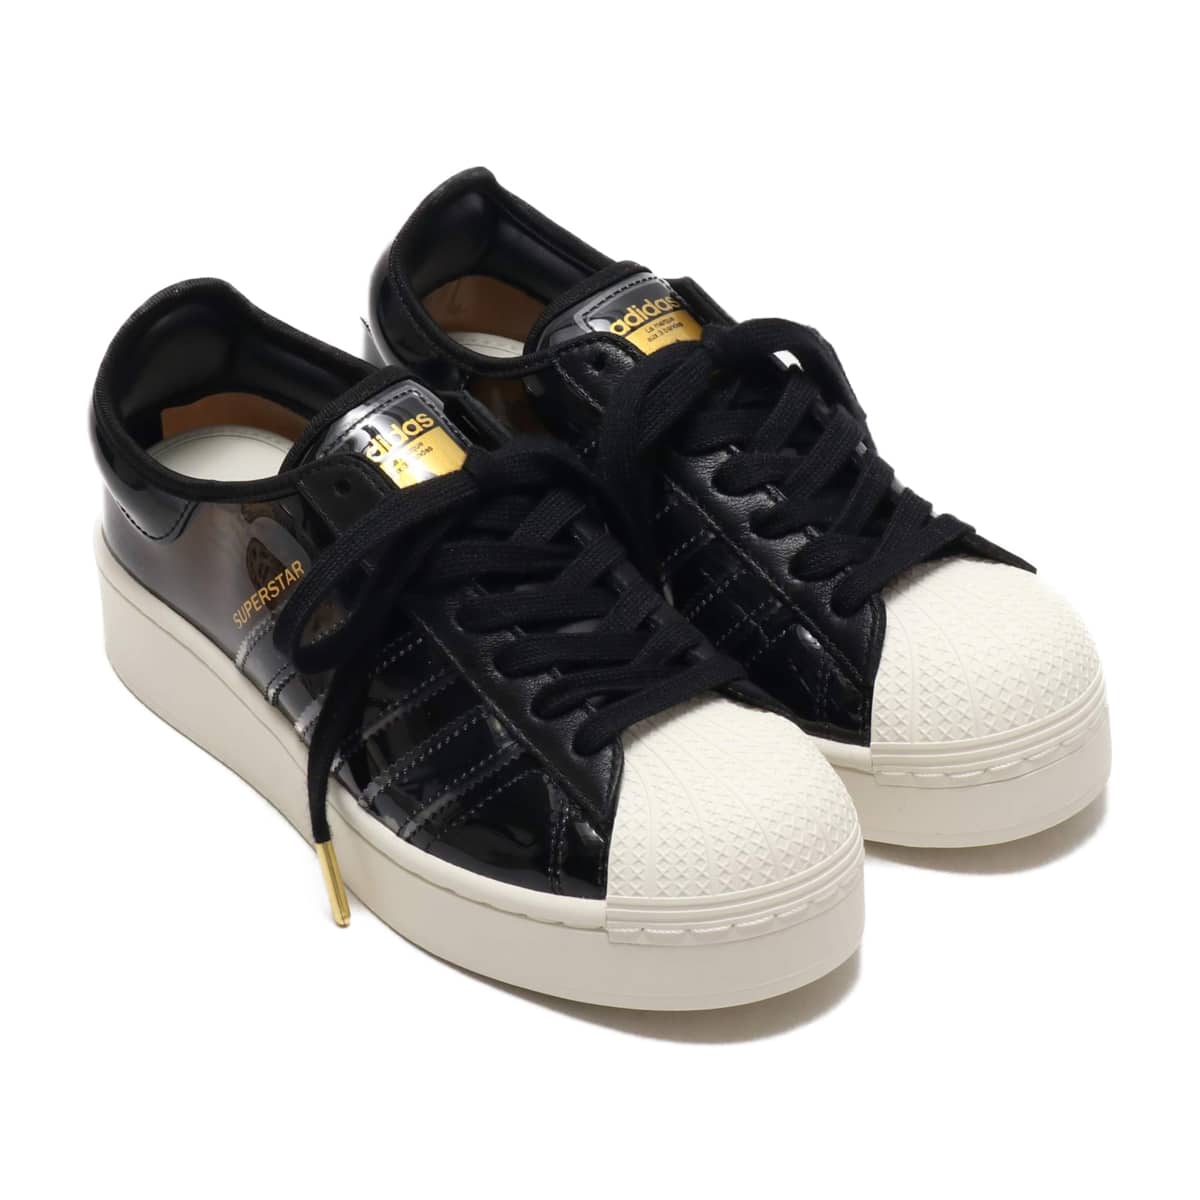 adidas SUPERSTARBOLD W CORE BLACK/CORE BLACK/OFF WHITE 20SS-S_photo_large